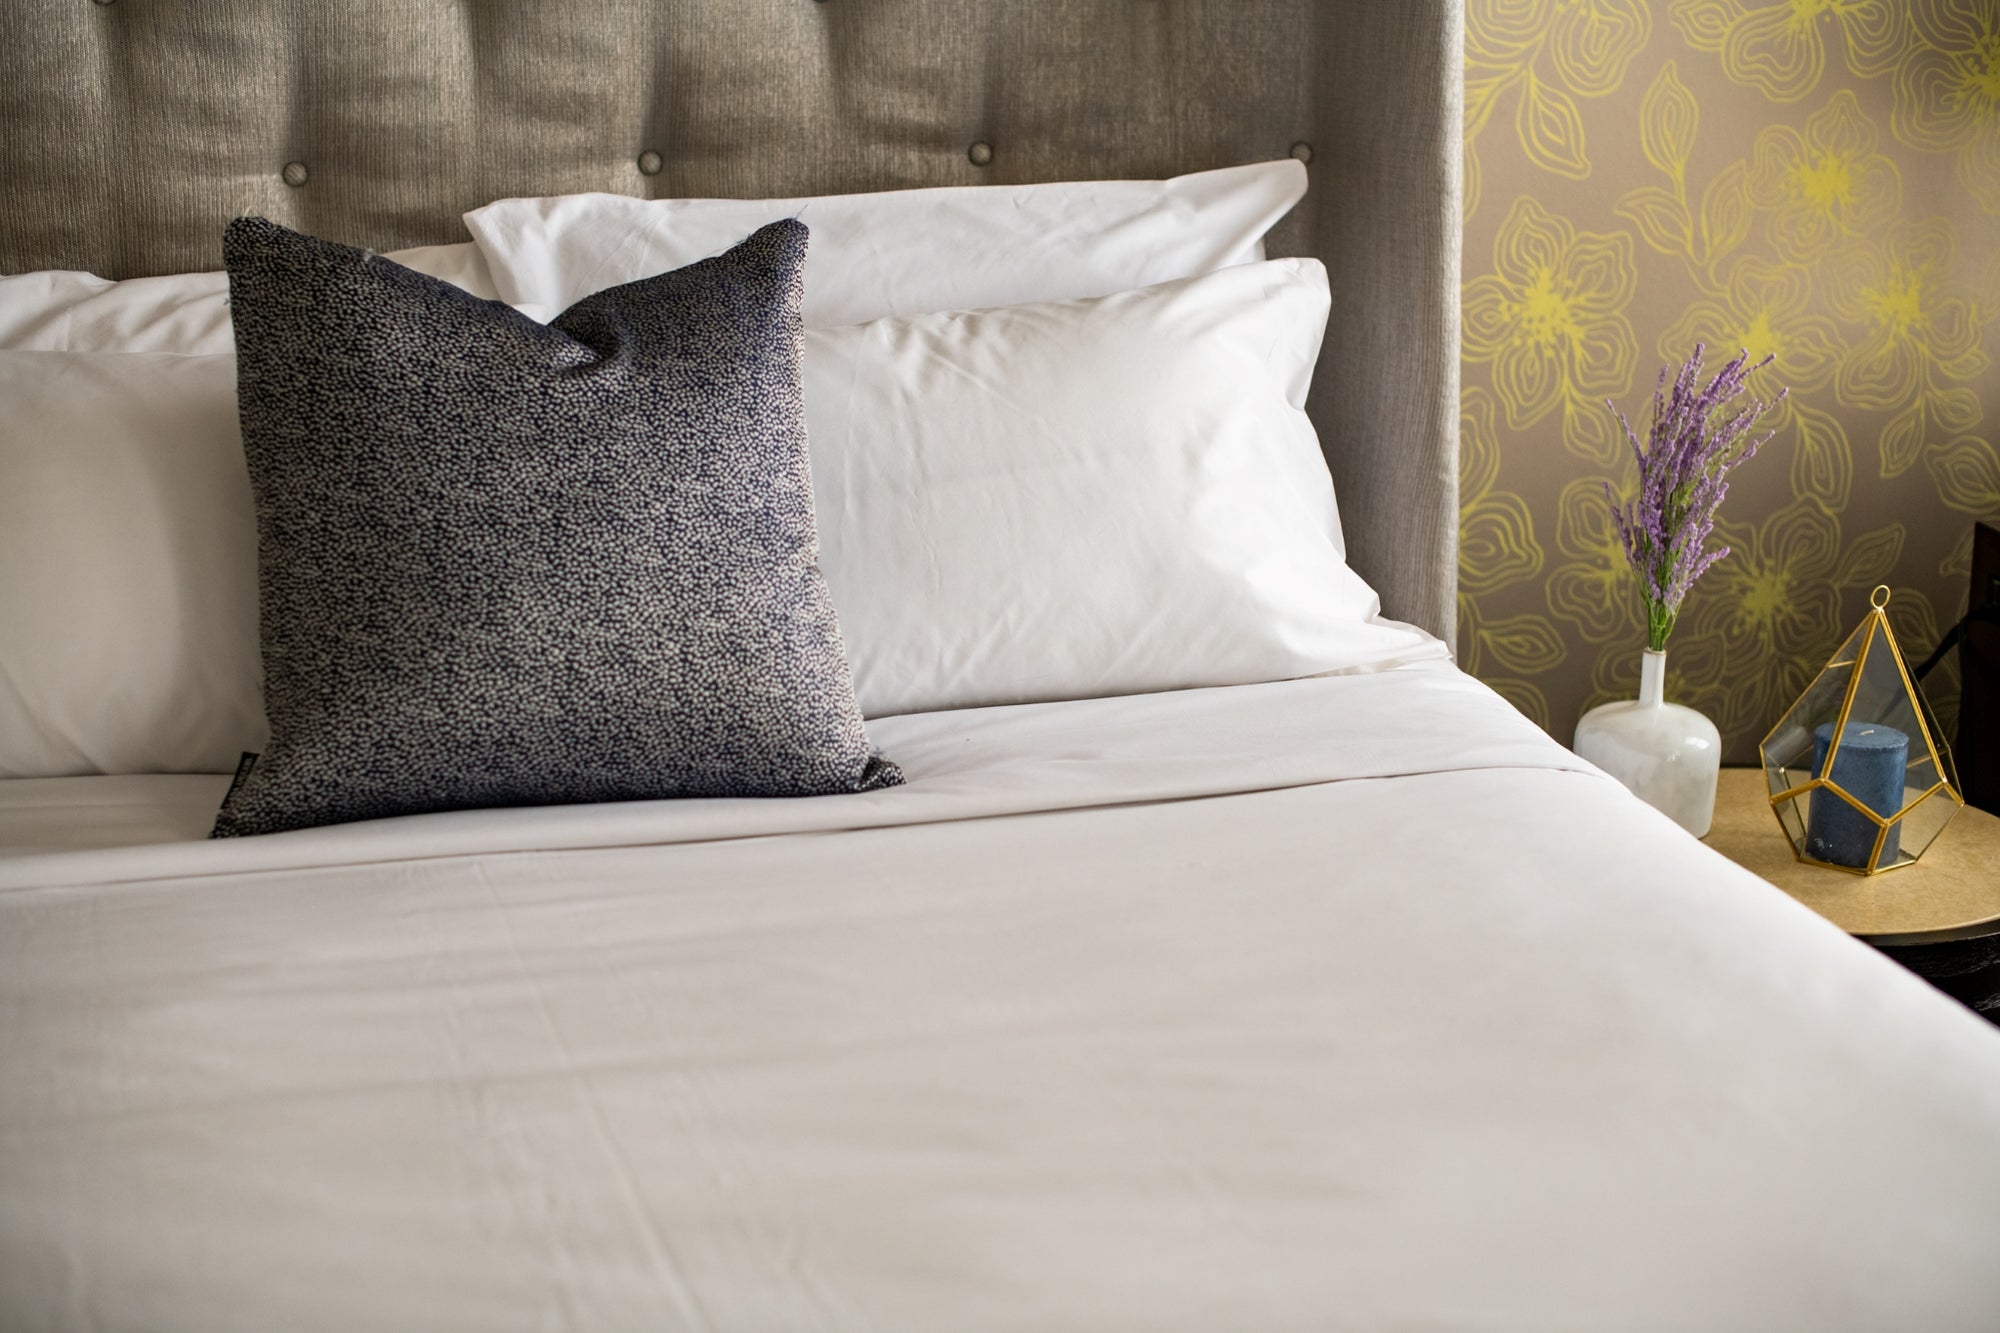 Luxury Bedding Sets That Will Make Your Bedroom Feel Like a Five-Star Hotel